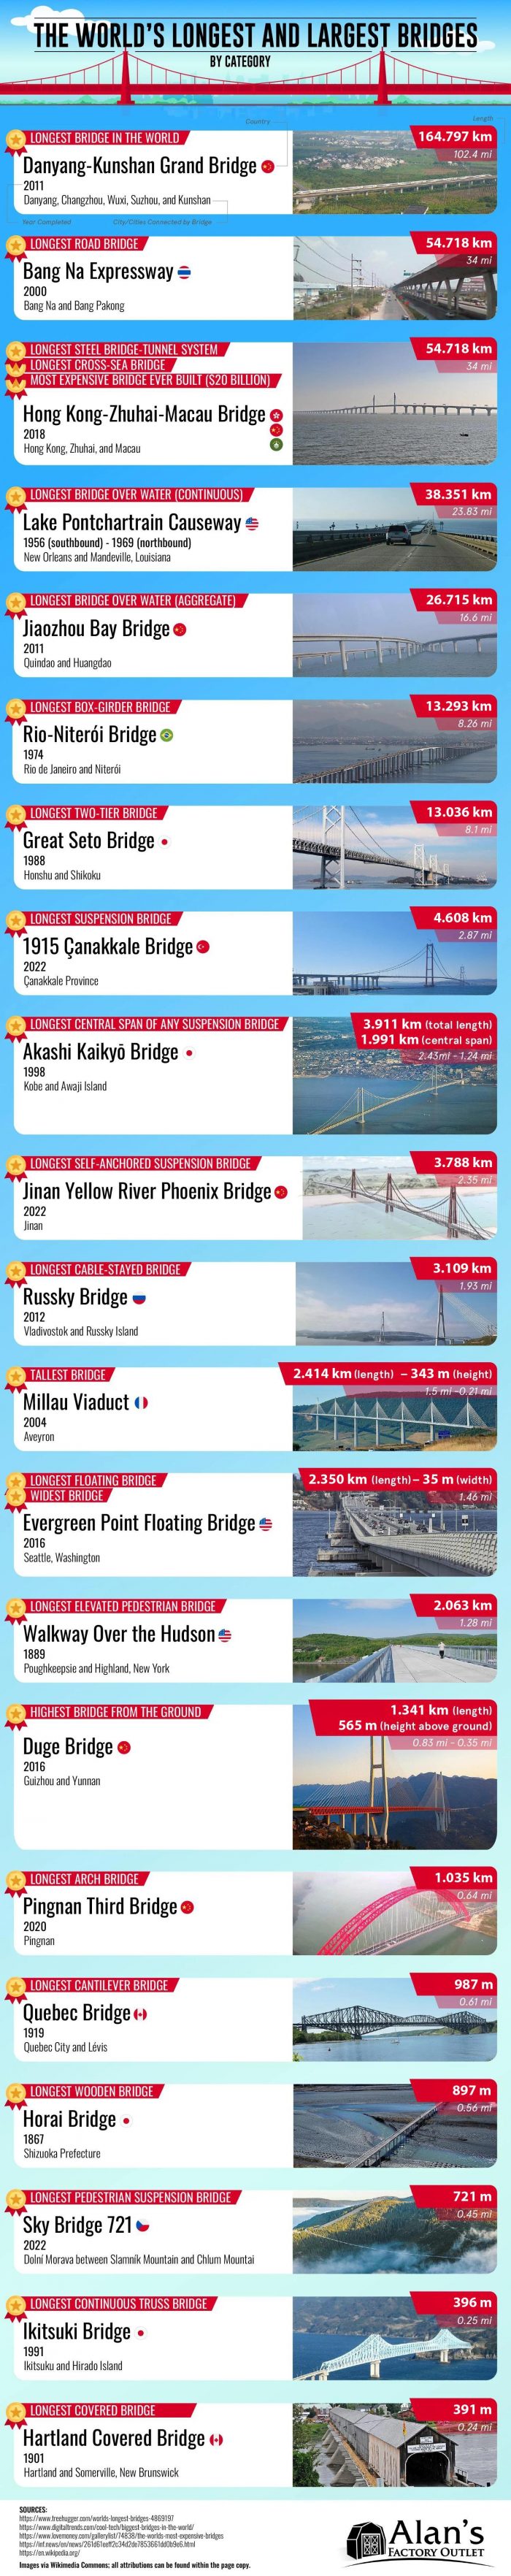 The Longest and Largest Bridges In The World by Category